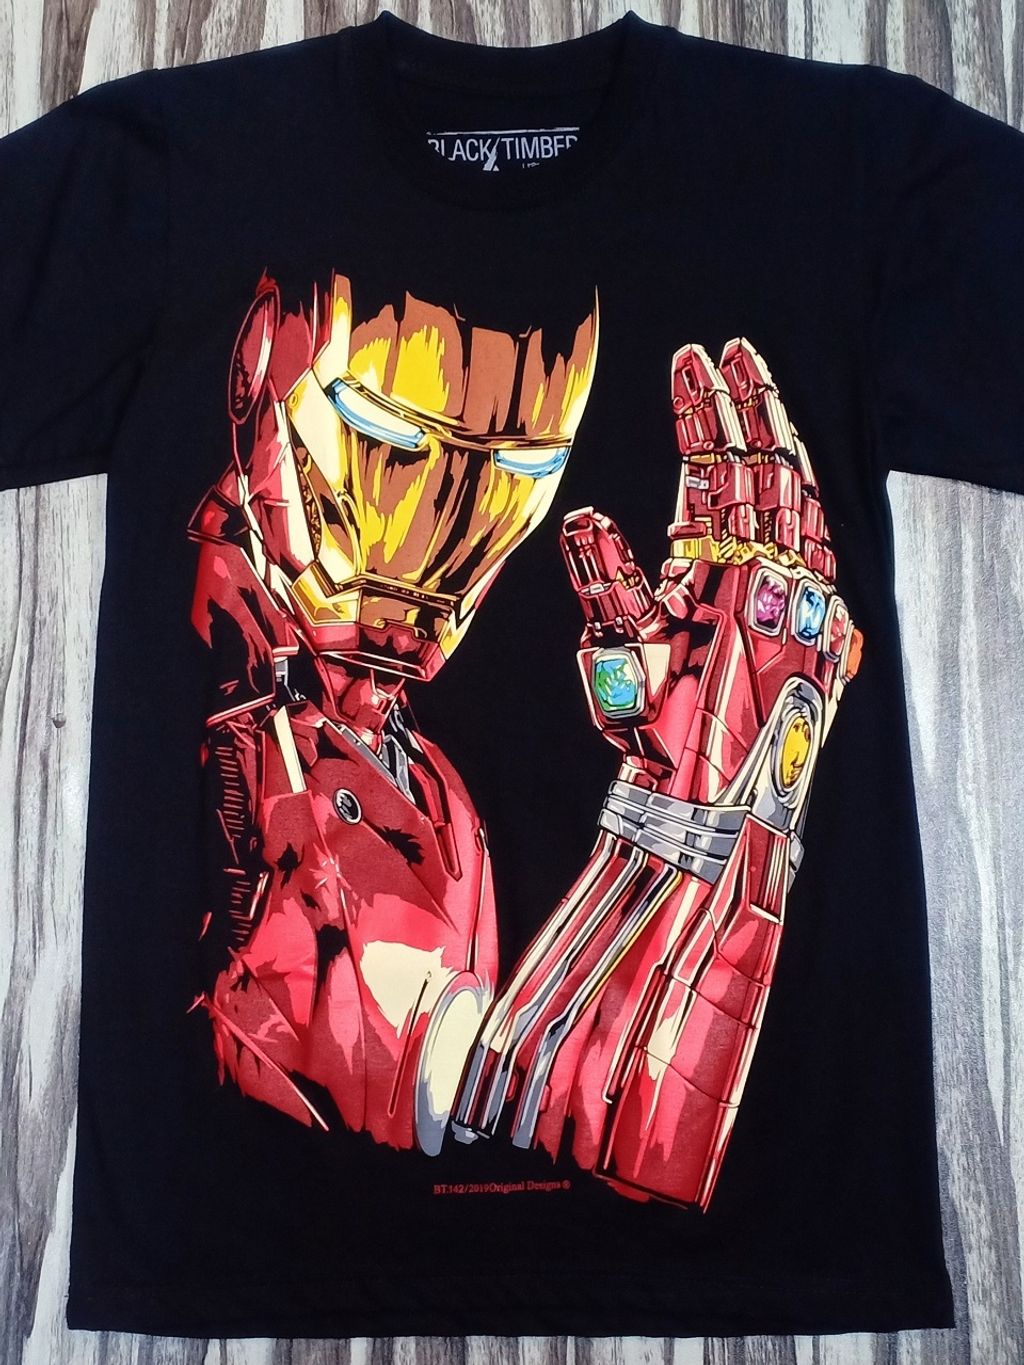 COTTON IRON END PREMIUM BLACK QUALITY MARVEL TIMBER GAME BT142 MOAI HIGH COLLECTABLE GRADE HIGH T-SHIRT NANO TYPE UNIVERSE SCREEN QUALITY MAN SYSTEM TIMBER NEW GAUNTLET SPEED – BLACK SILK SCREEN SILK